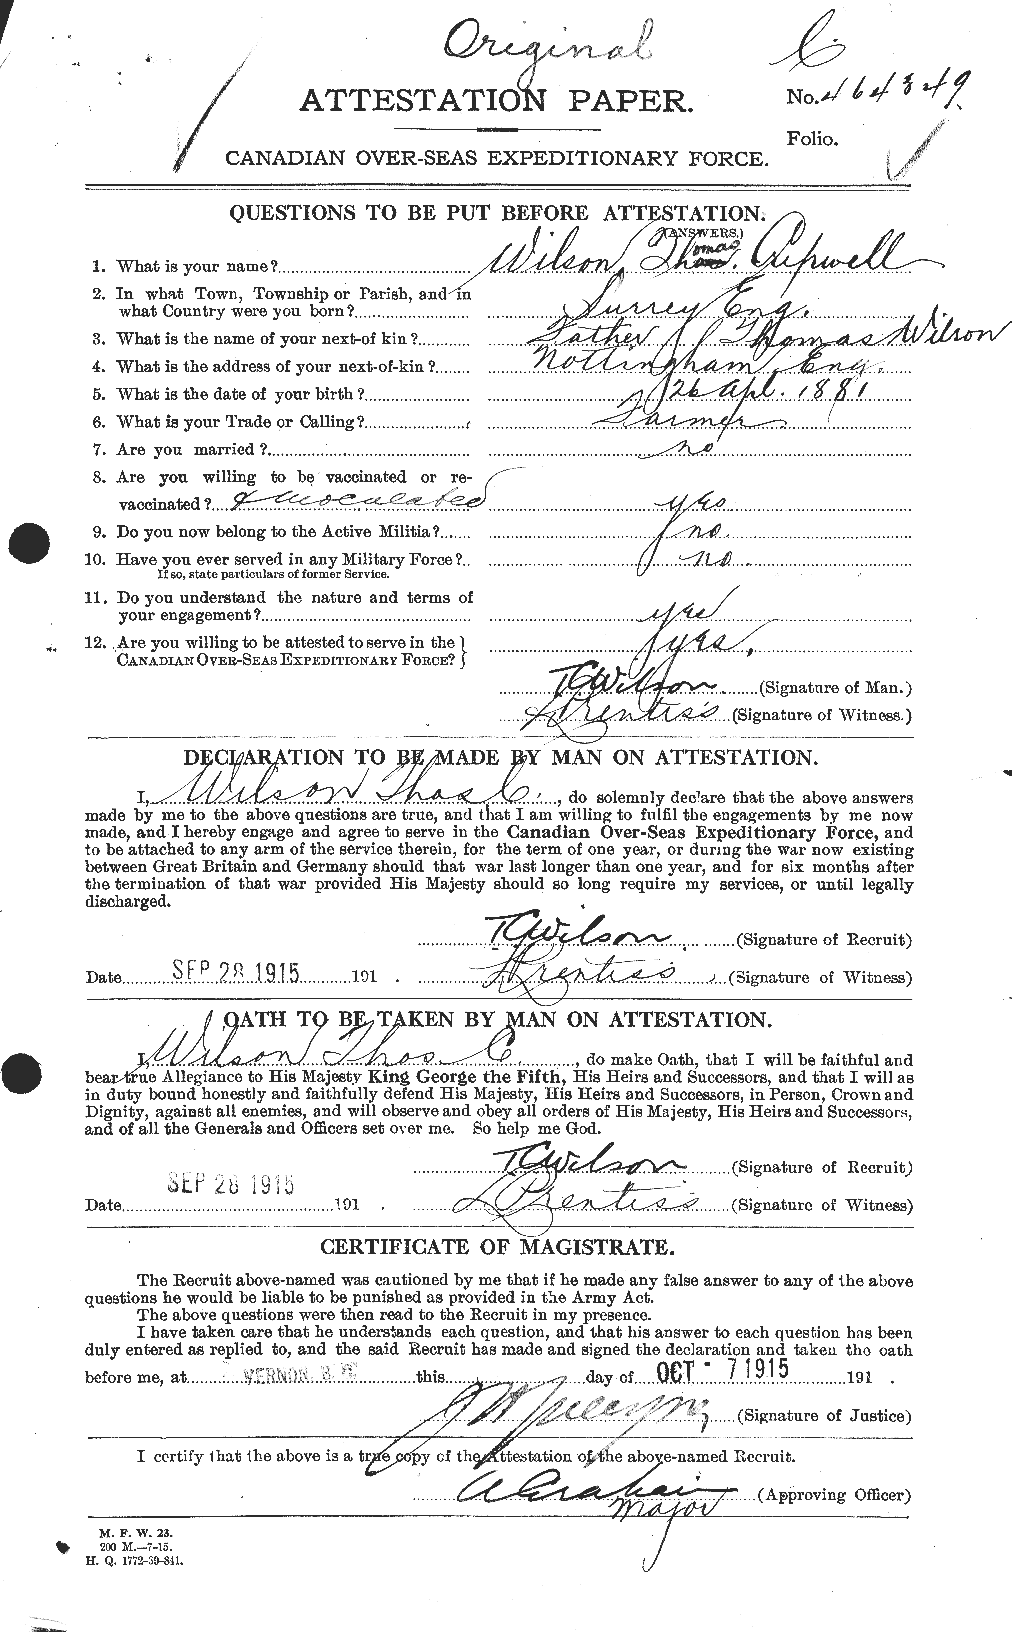 Personnel Records of the First World War - CEF 681249a